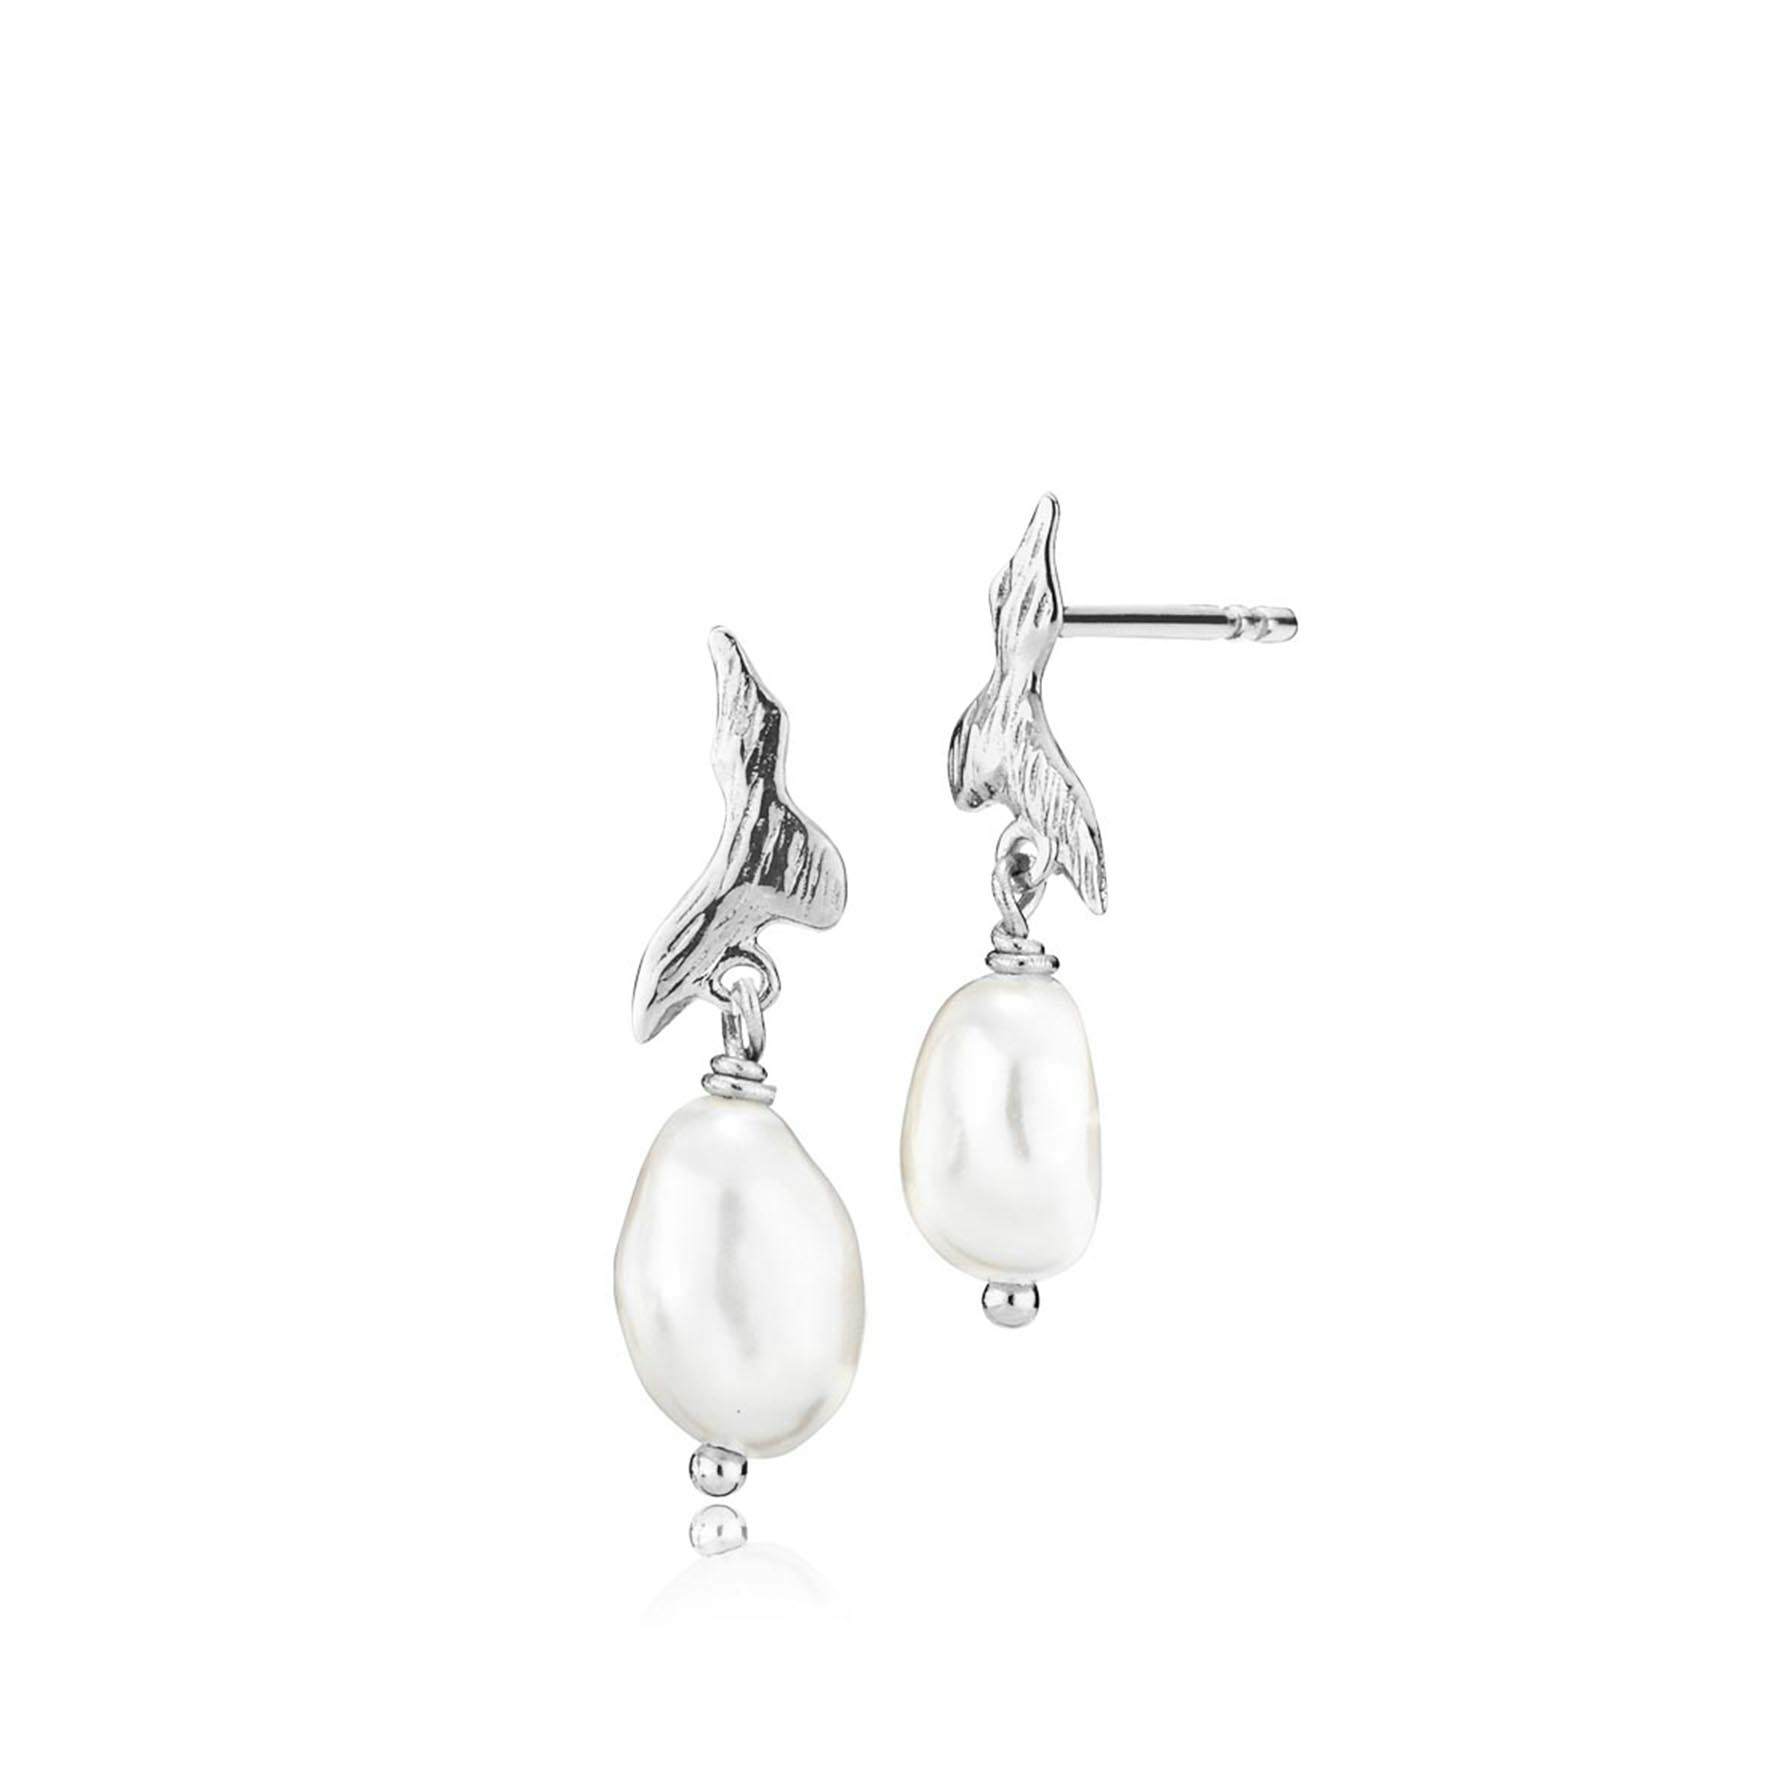 Fairy Earrings With Pearl von Izabel Camille in Silber Sterling 925|Freshwater Pearl